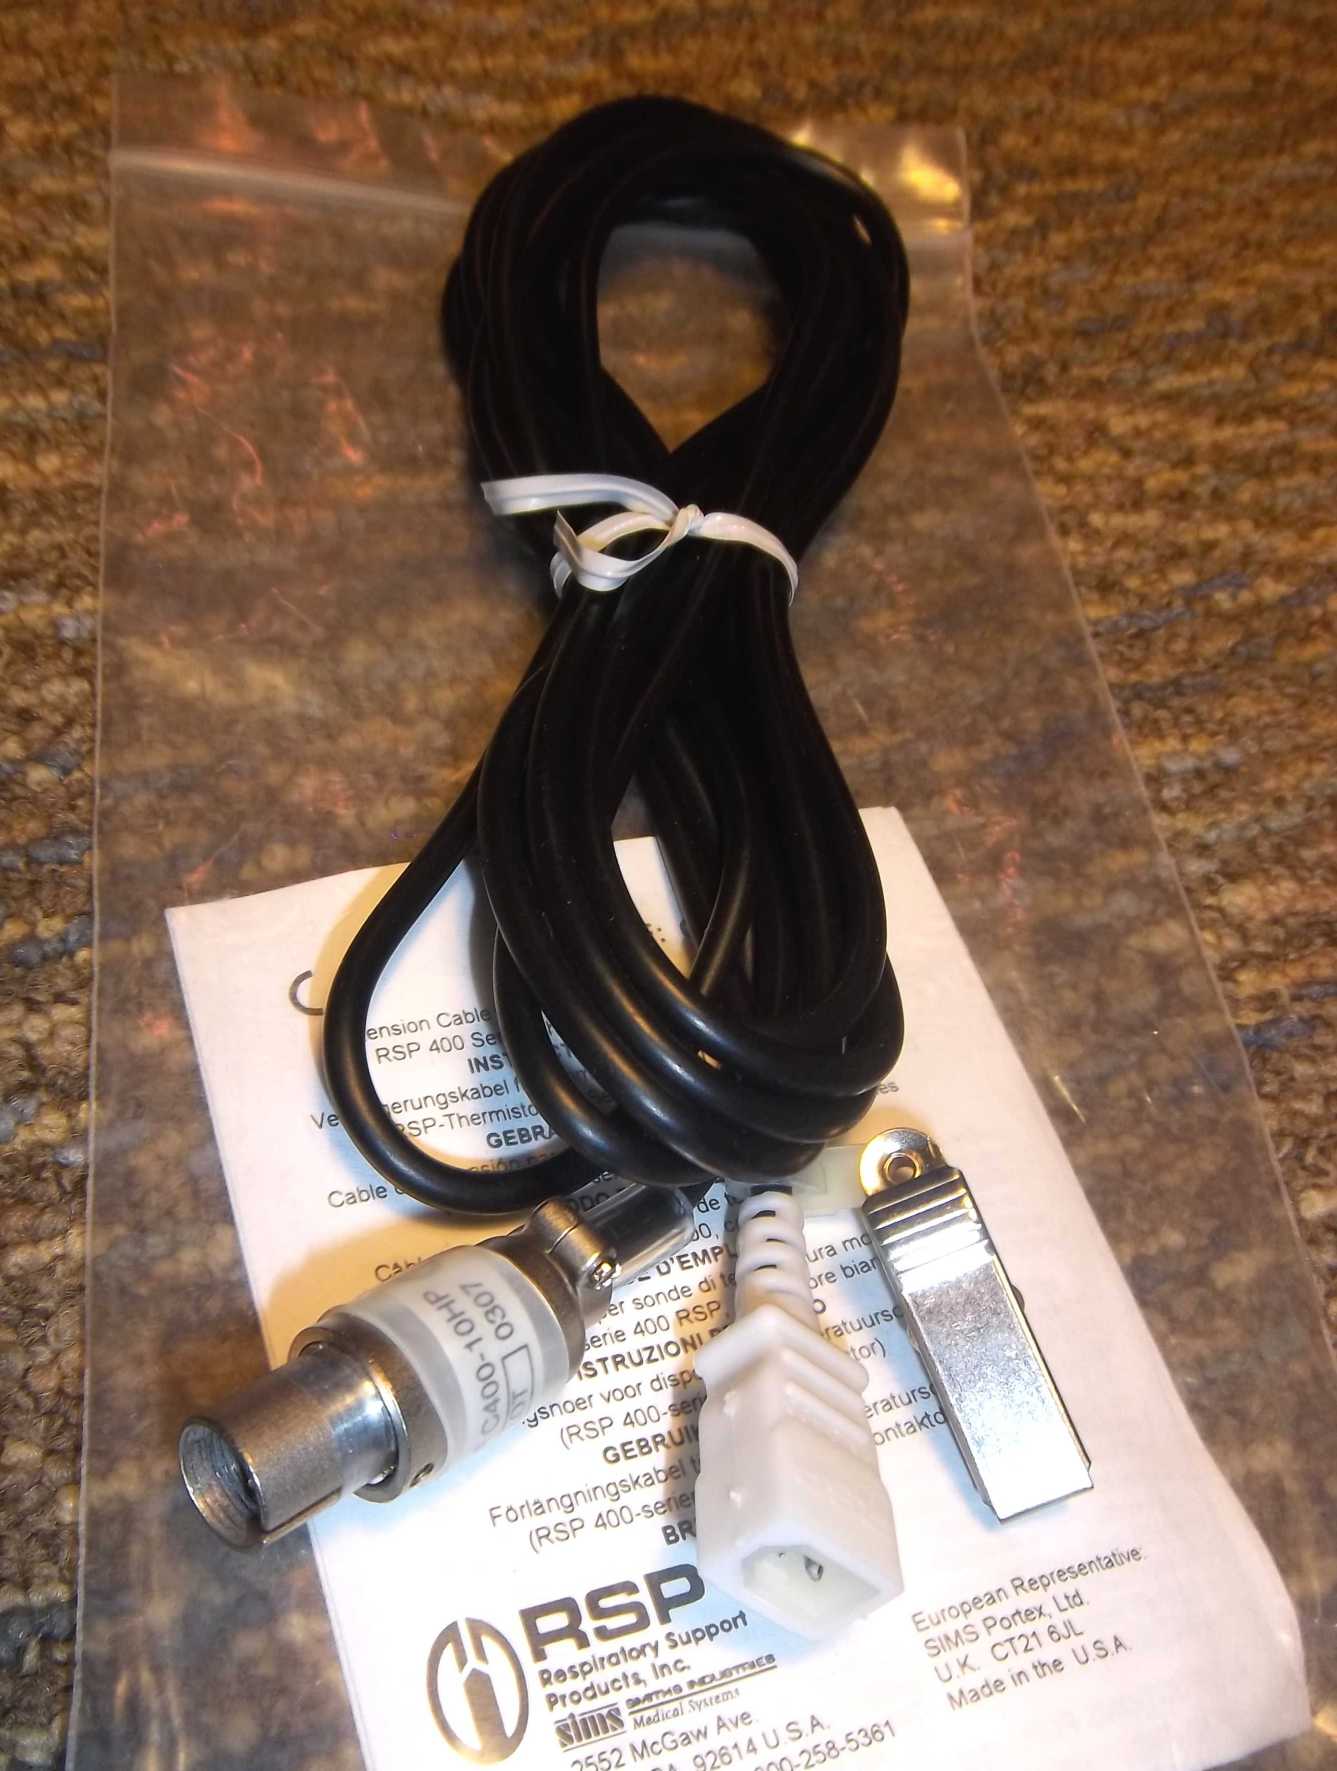 New 10 ft extension cable for Level 1 temp probes cables